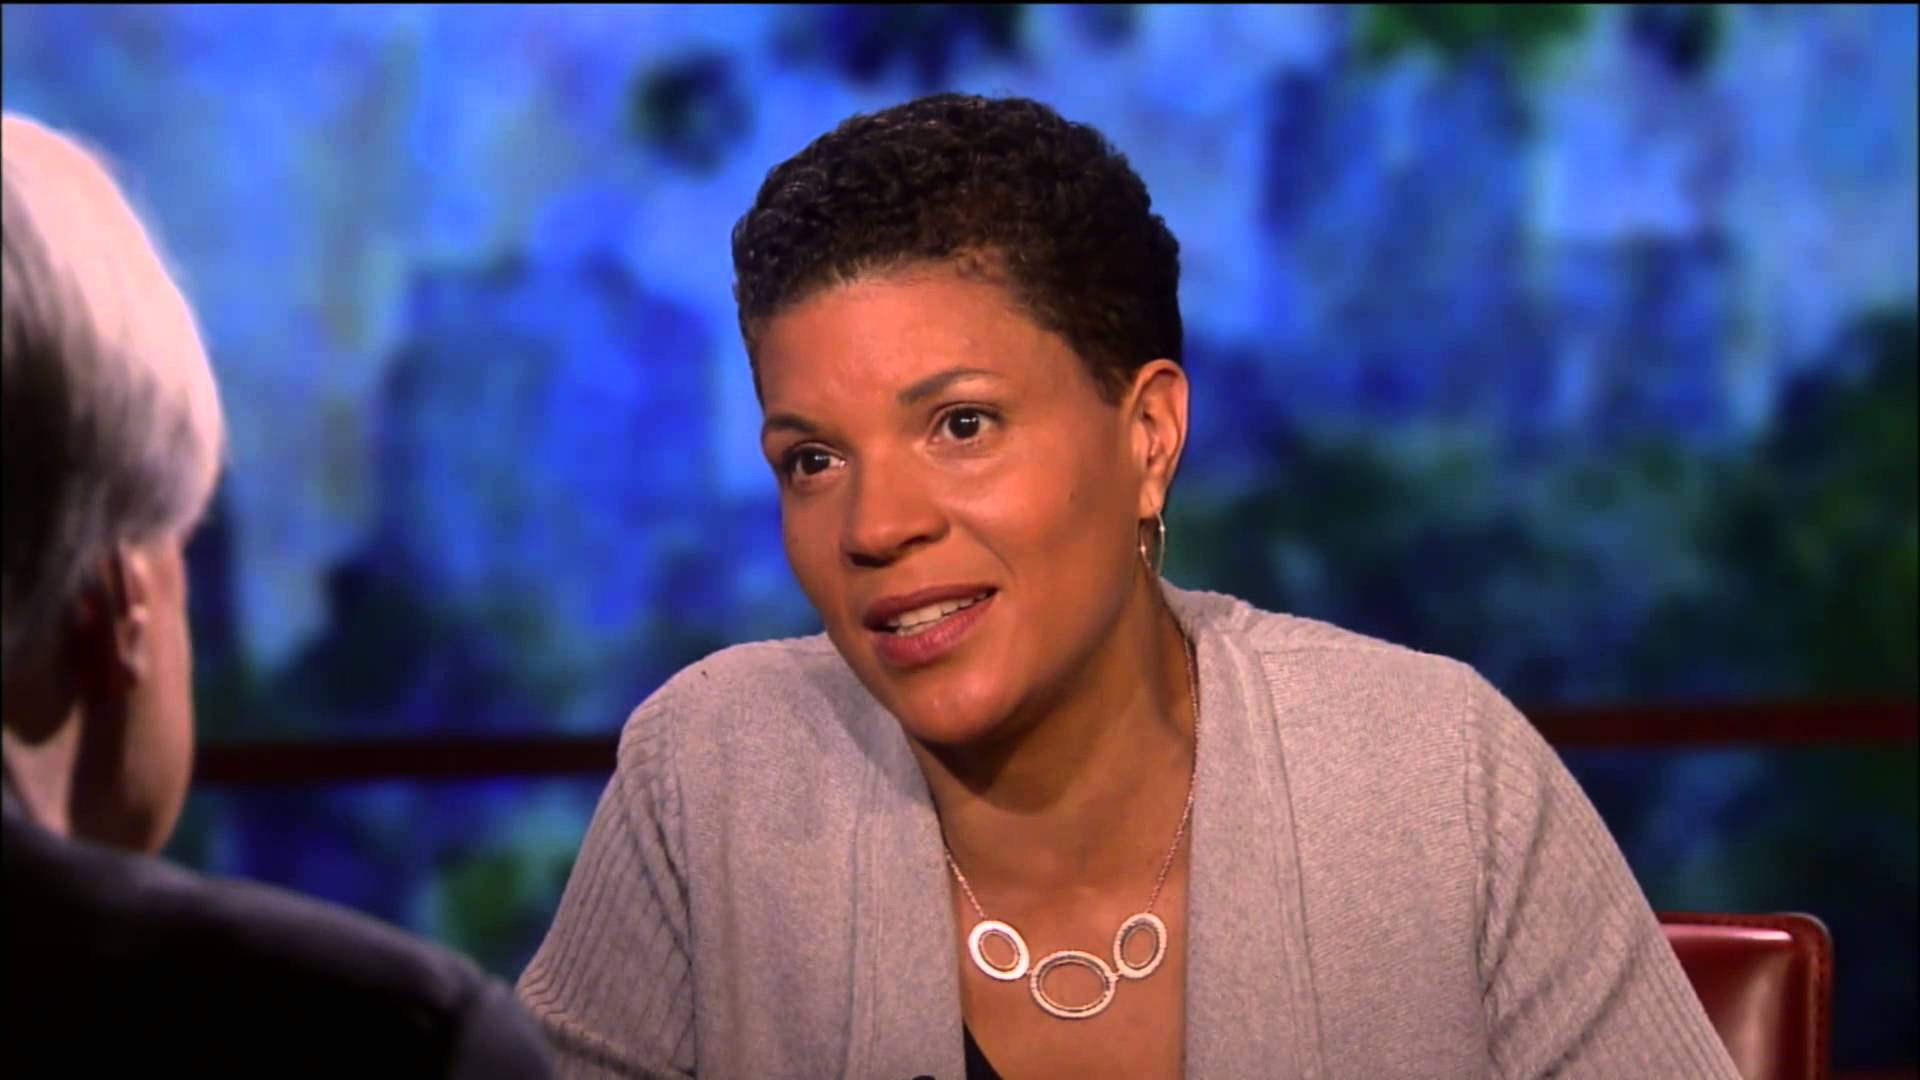 Michelle Alexander: Locked Out of the American Dream